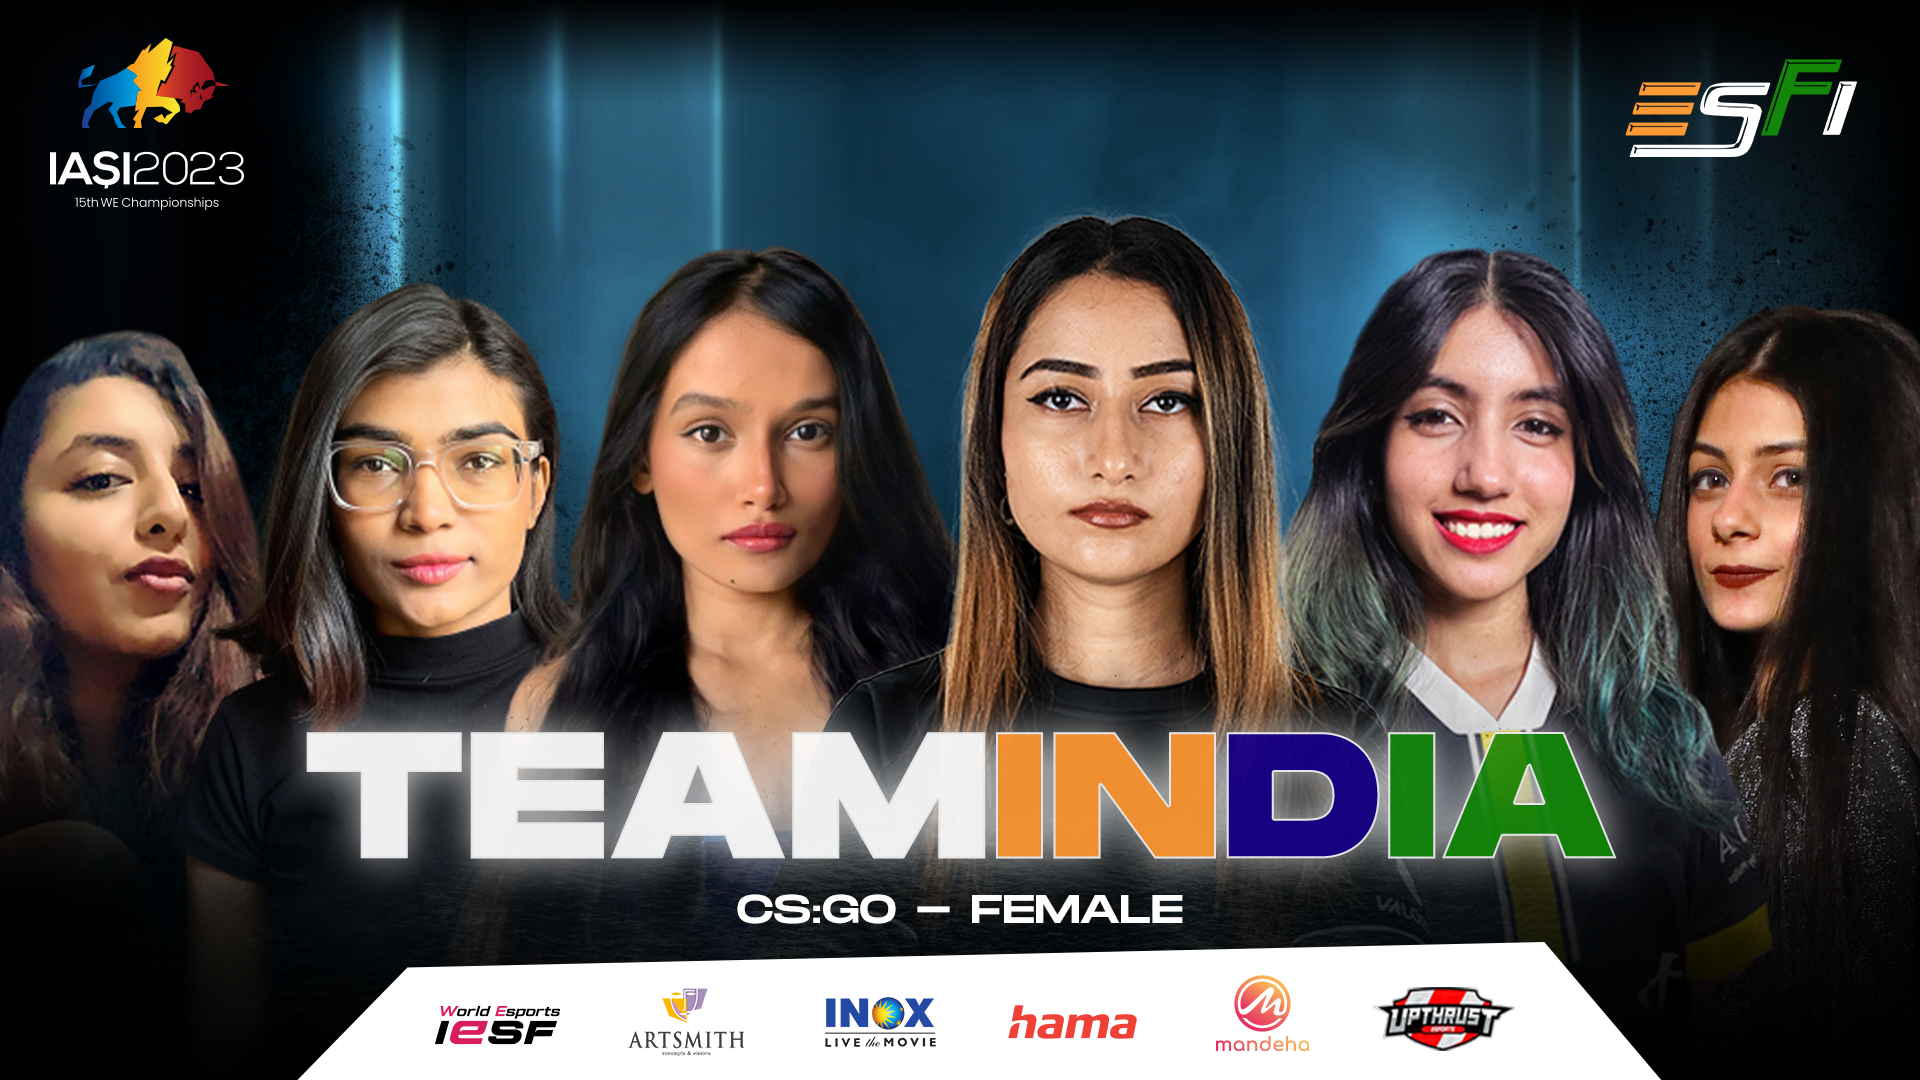 India's Top-G triumphed in the CS:GO tournament at the National Esports Championships to become the first female team from the country to qualify for the World Esports Championships ©ESFI